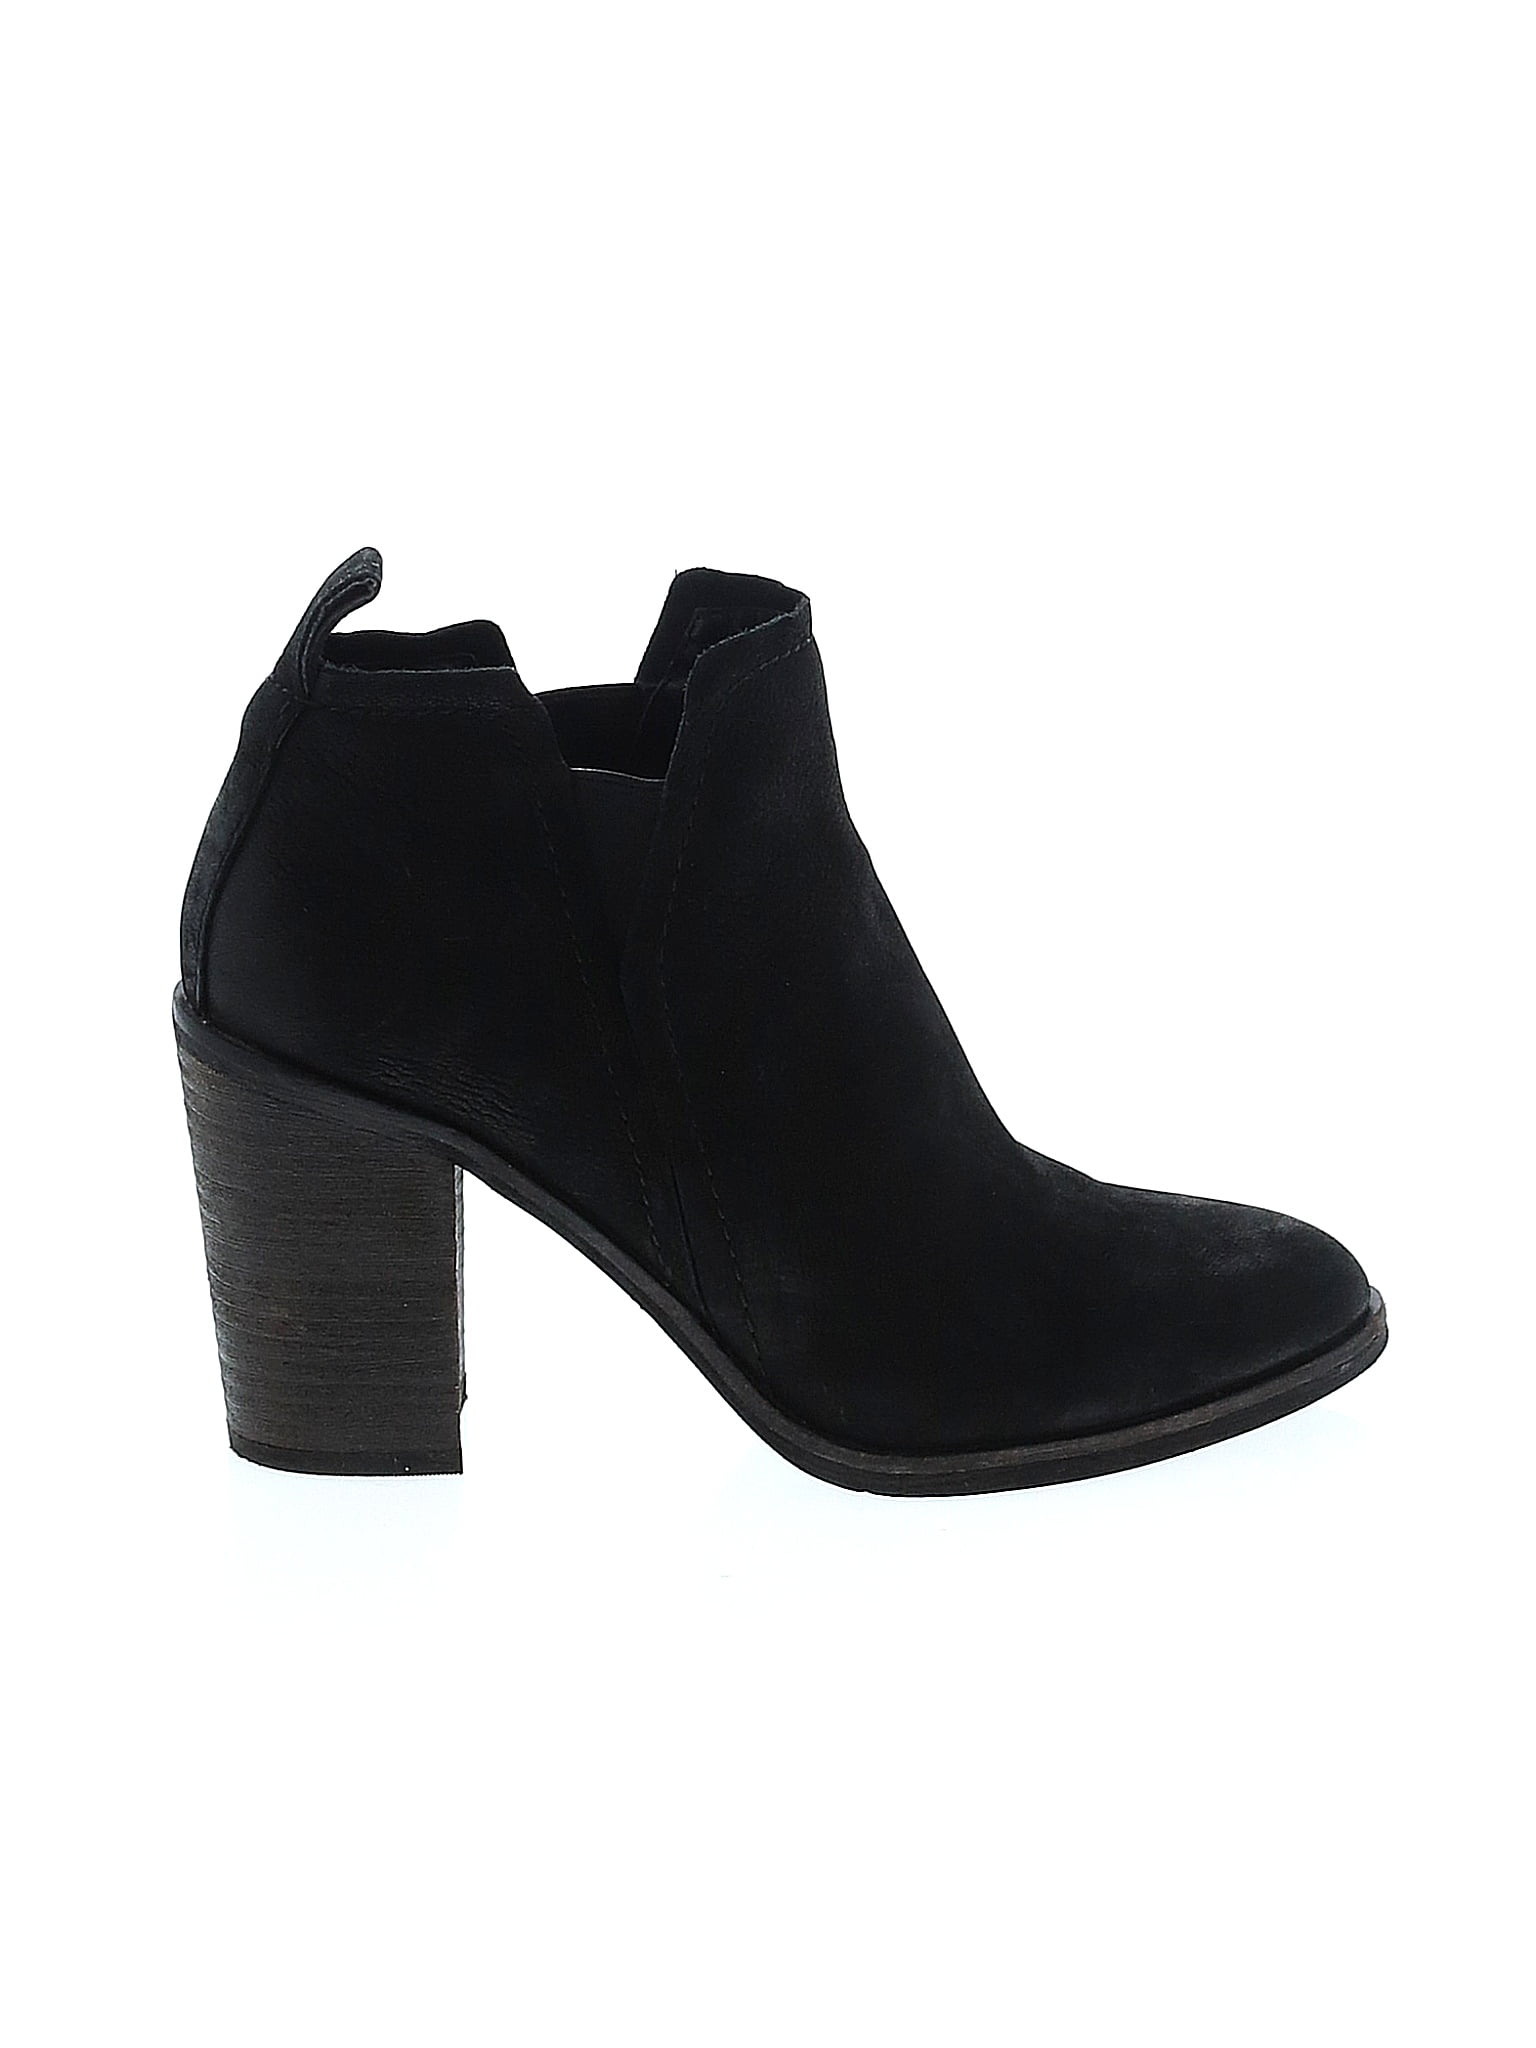 Pre-Owned Dolce Vita Women's Size 7 Ankle Boots - Walmart.com